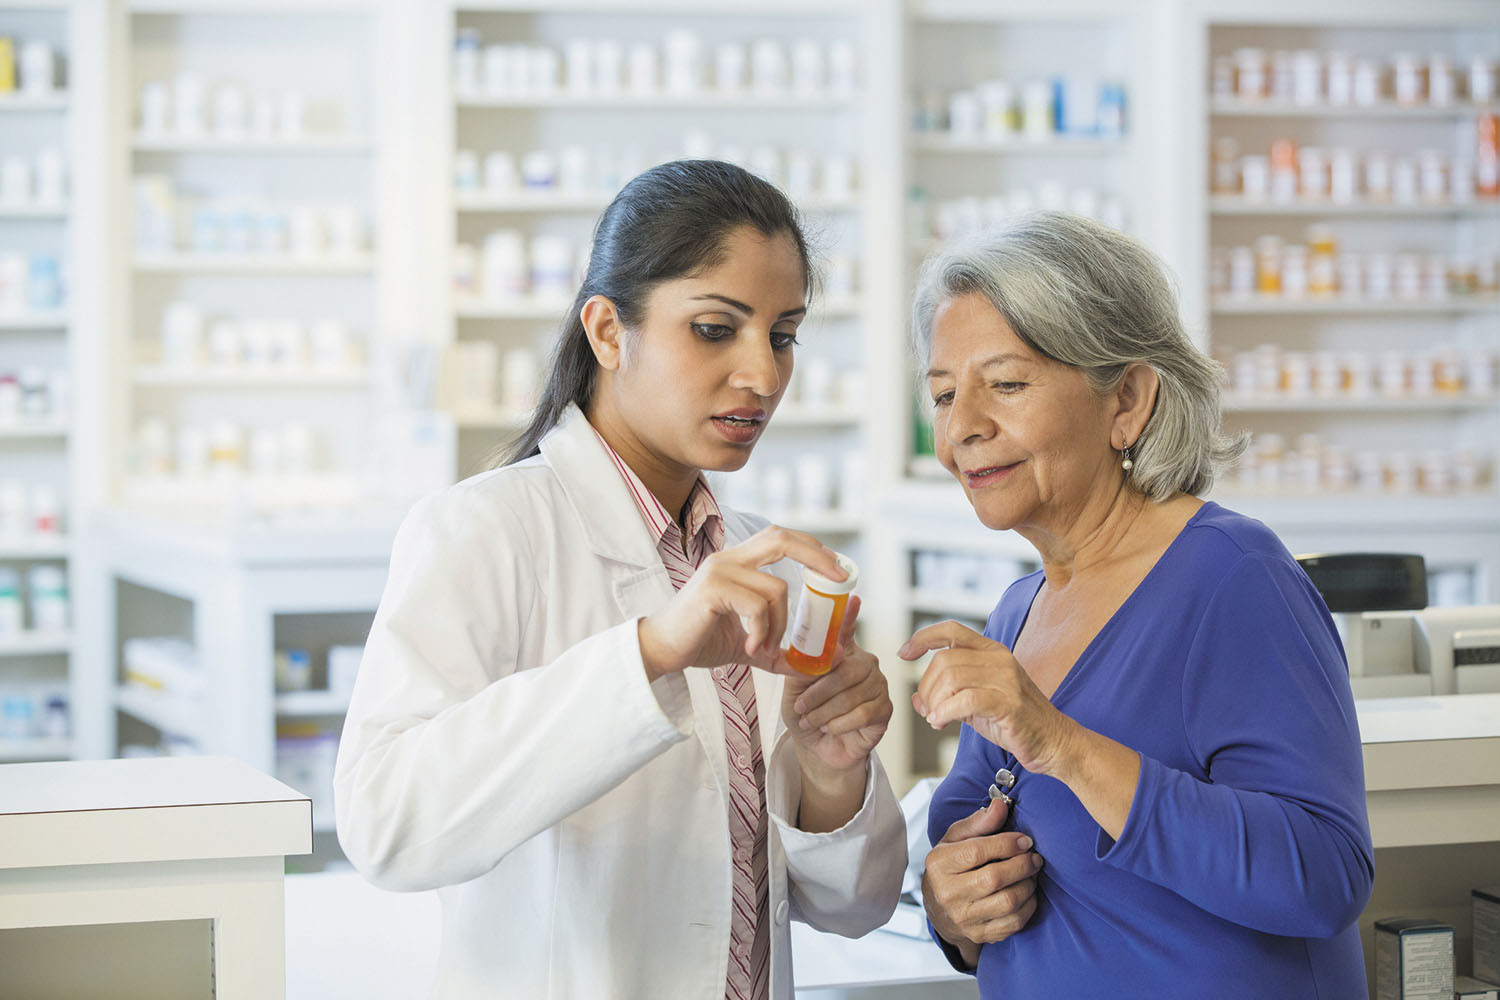 photo of pharmacist discussing medication with a customer, holding the bottle in her hand and pointing to the label